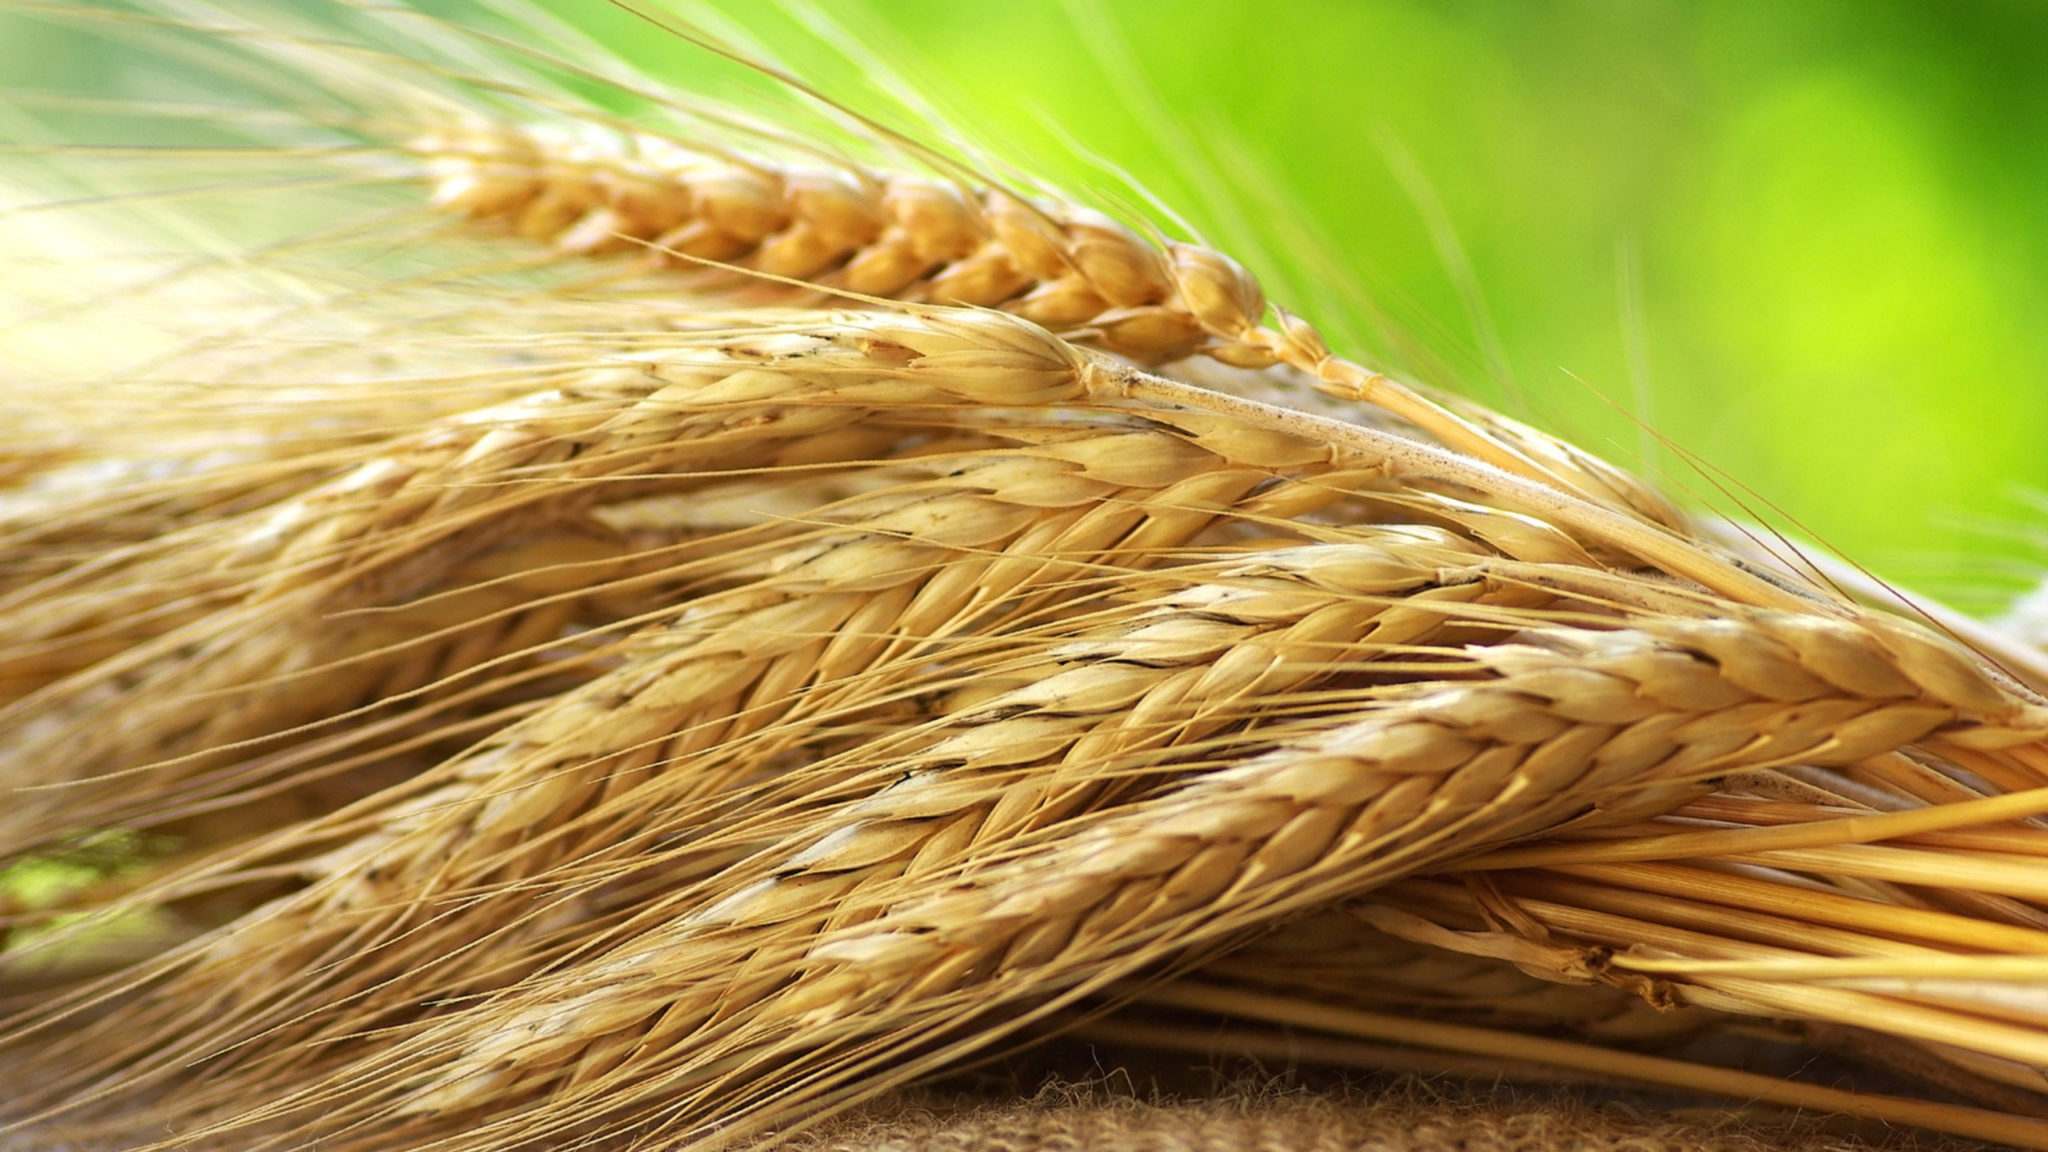 Four districts of the Karaganda region have completed the harvesting of grain